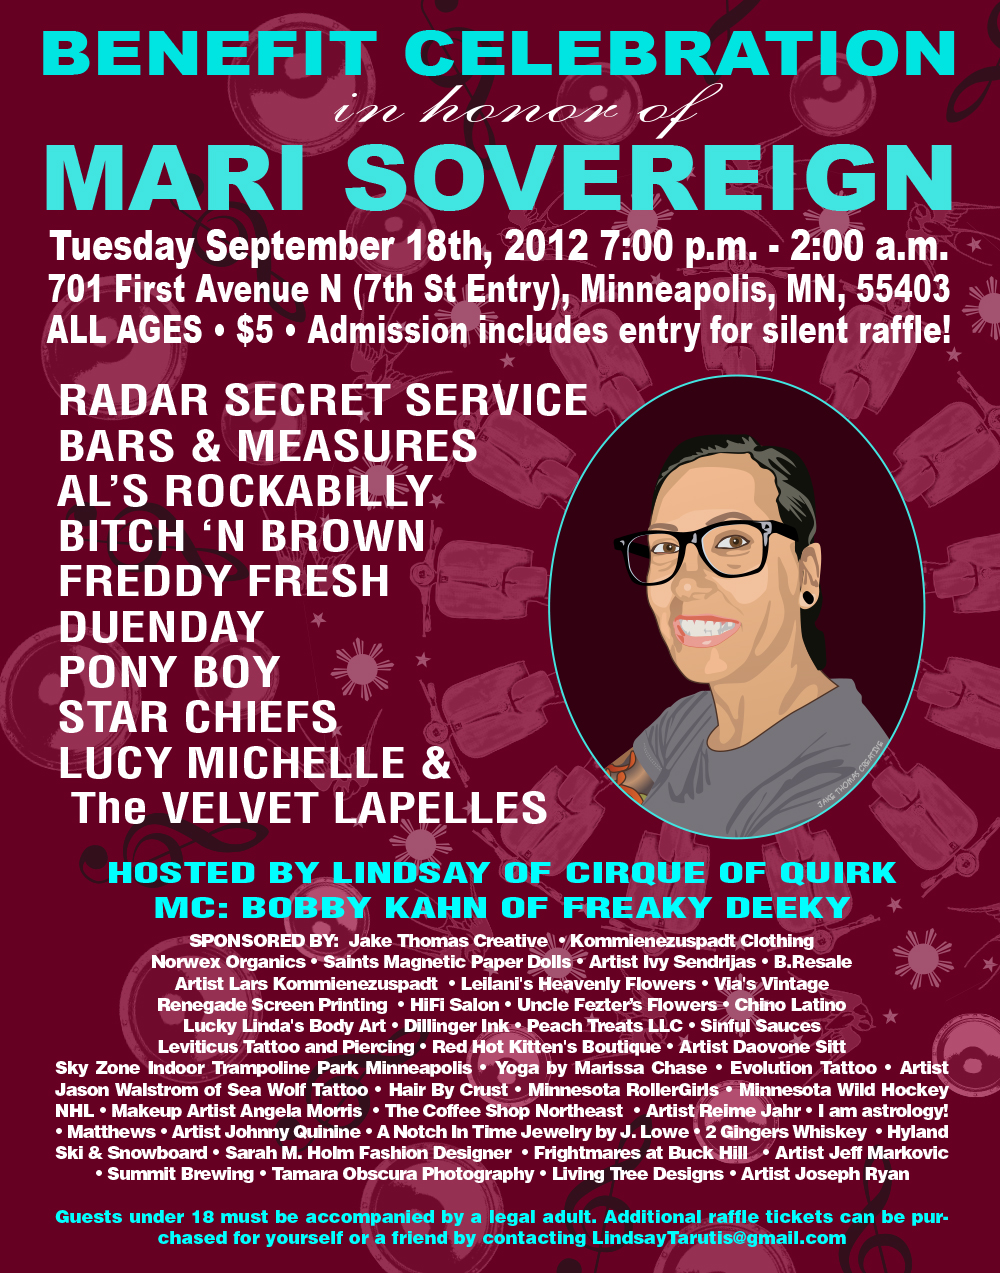 Benefit for Mari Sovereign